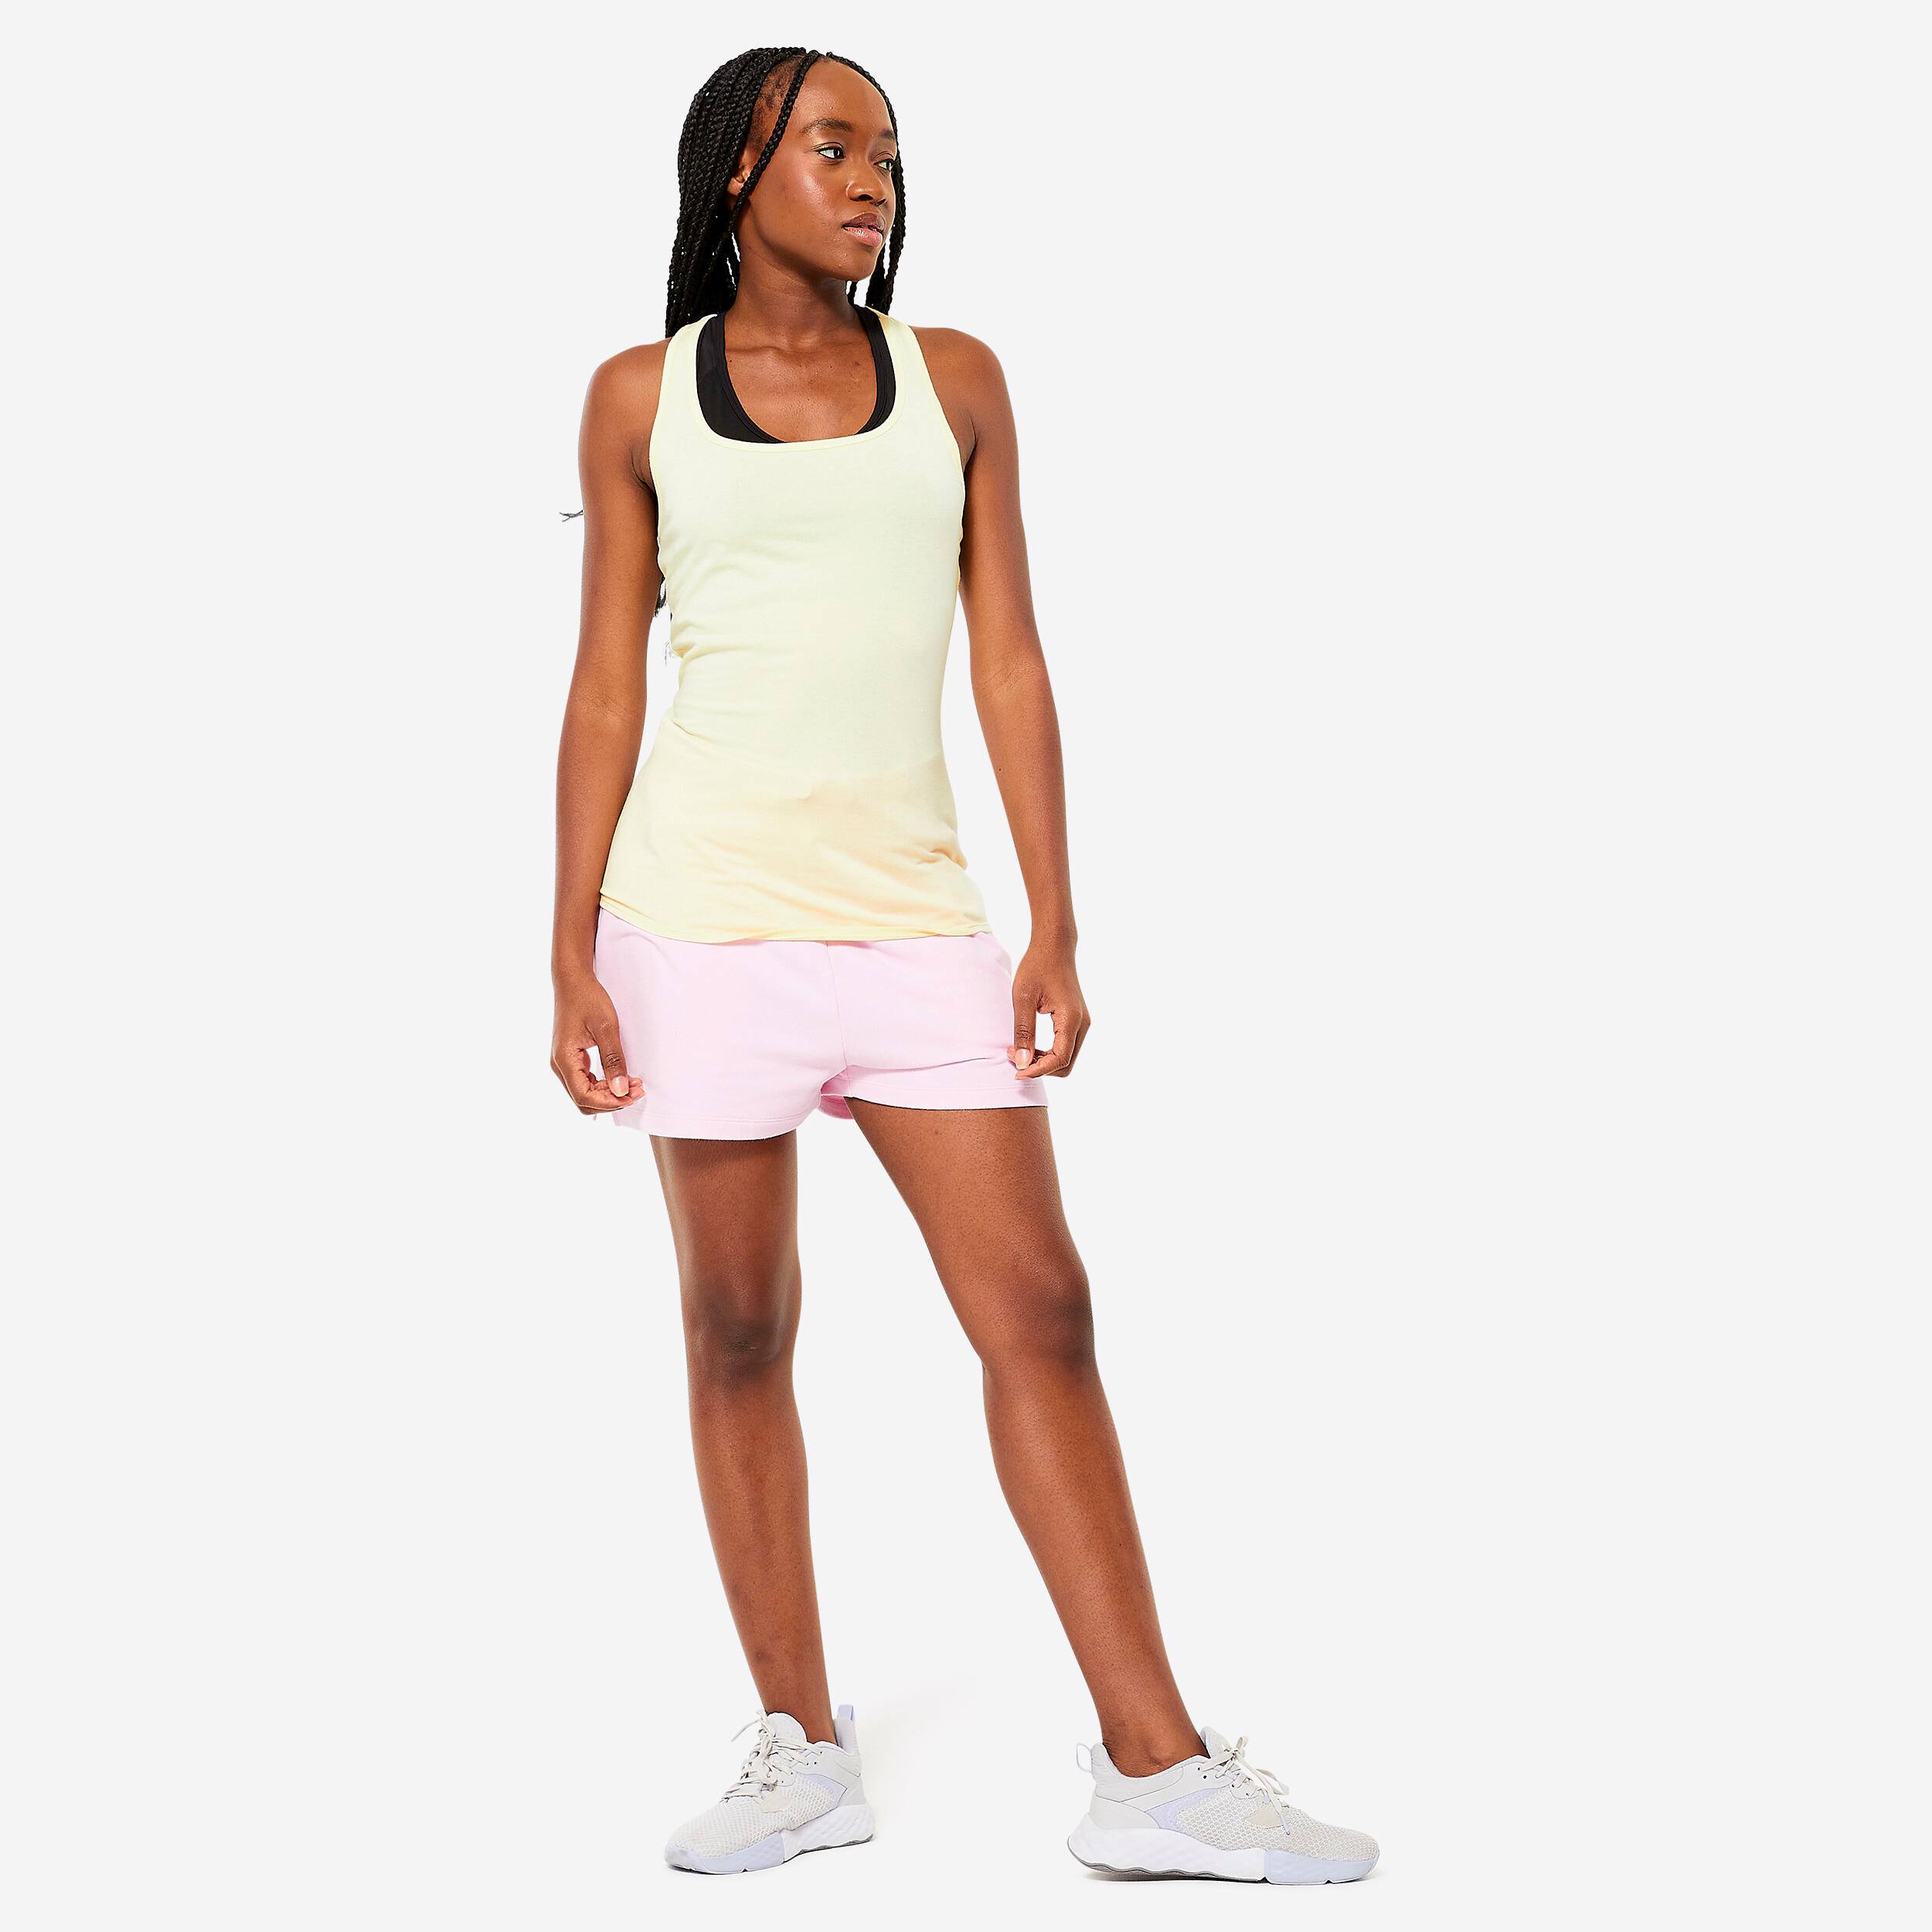 Women's Cotton Fitness Shorts 520 with Pocket - Pale Pink 2/6